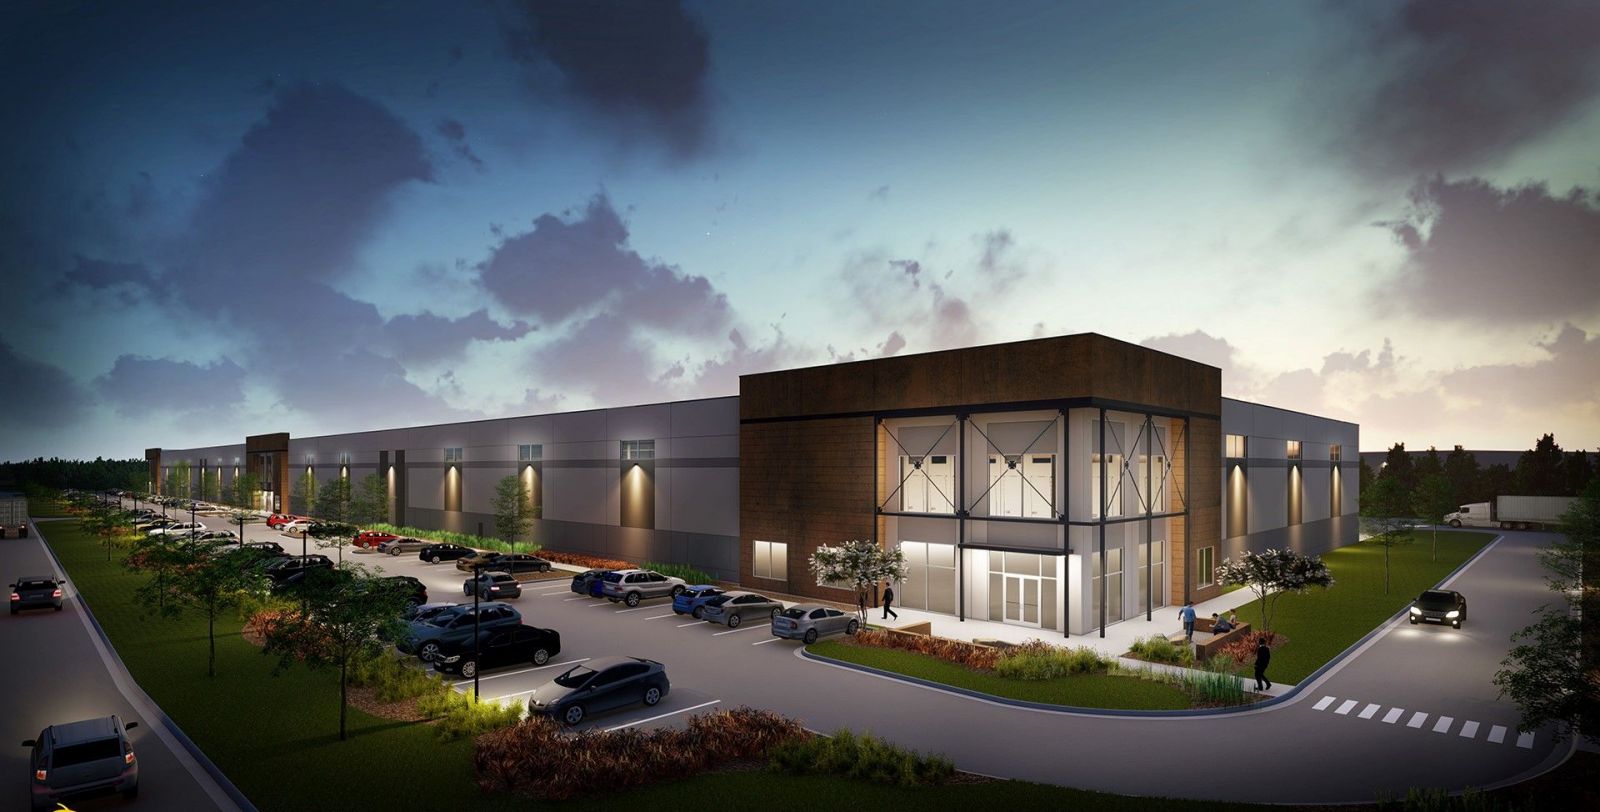 The 172-acre Fox Hill Business Park will be planned around industrial, distribution or warehousing needs. (Photo/Provided)